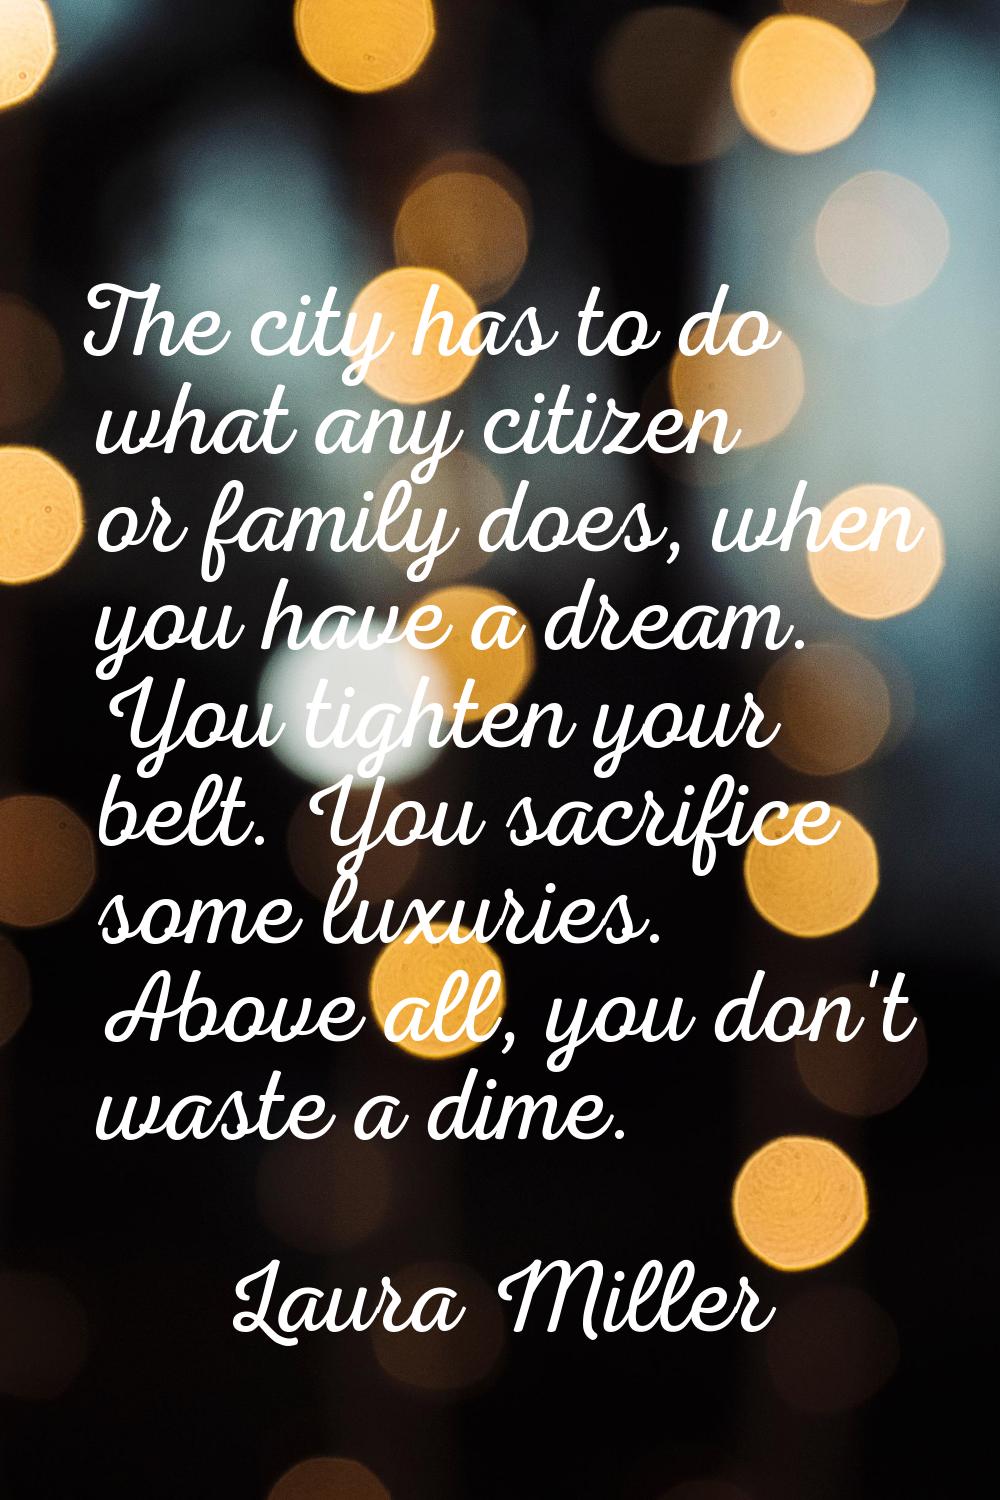 The city has to do what any citizen or family does, when you have a dream. You tighten your belt. Y